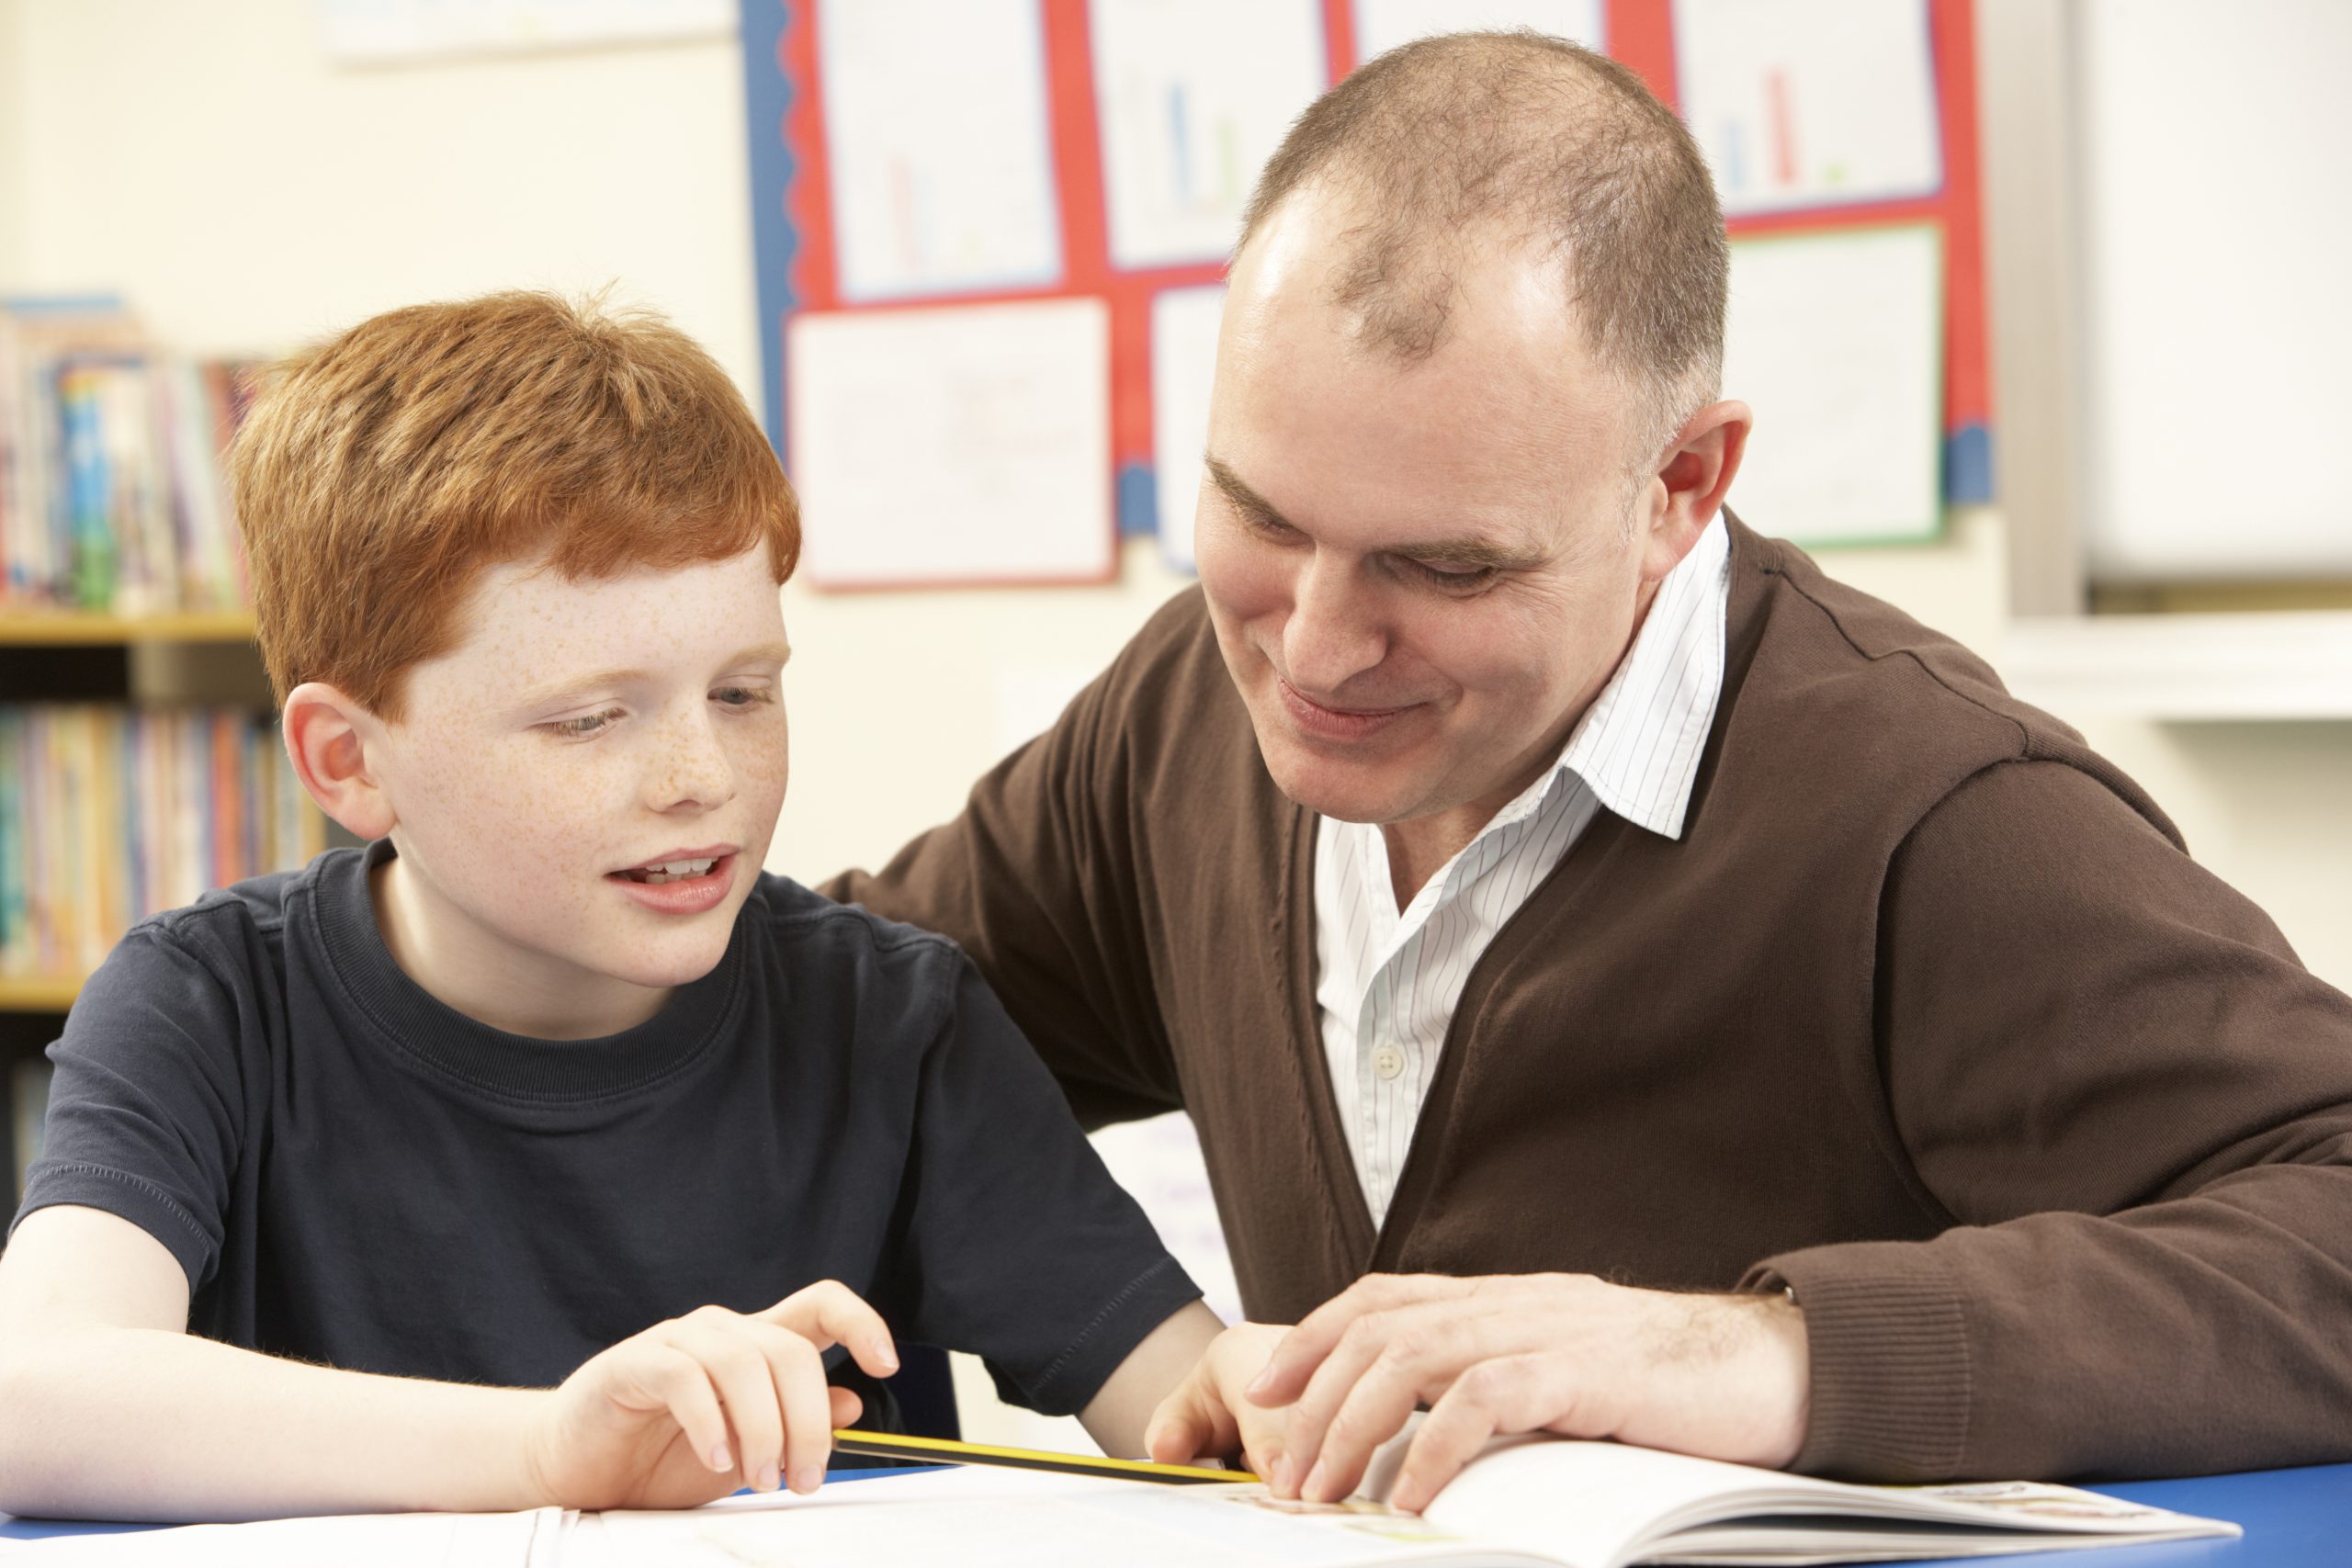 TEACHING STUDENTS WITH AUTISM STRATEGIES FOR SUCCESS